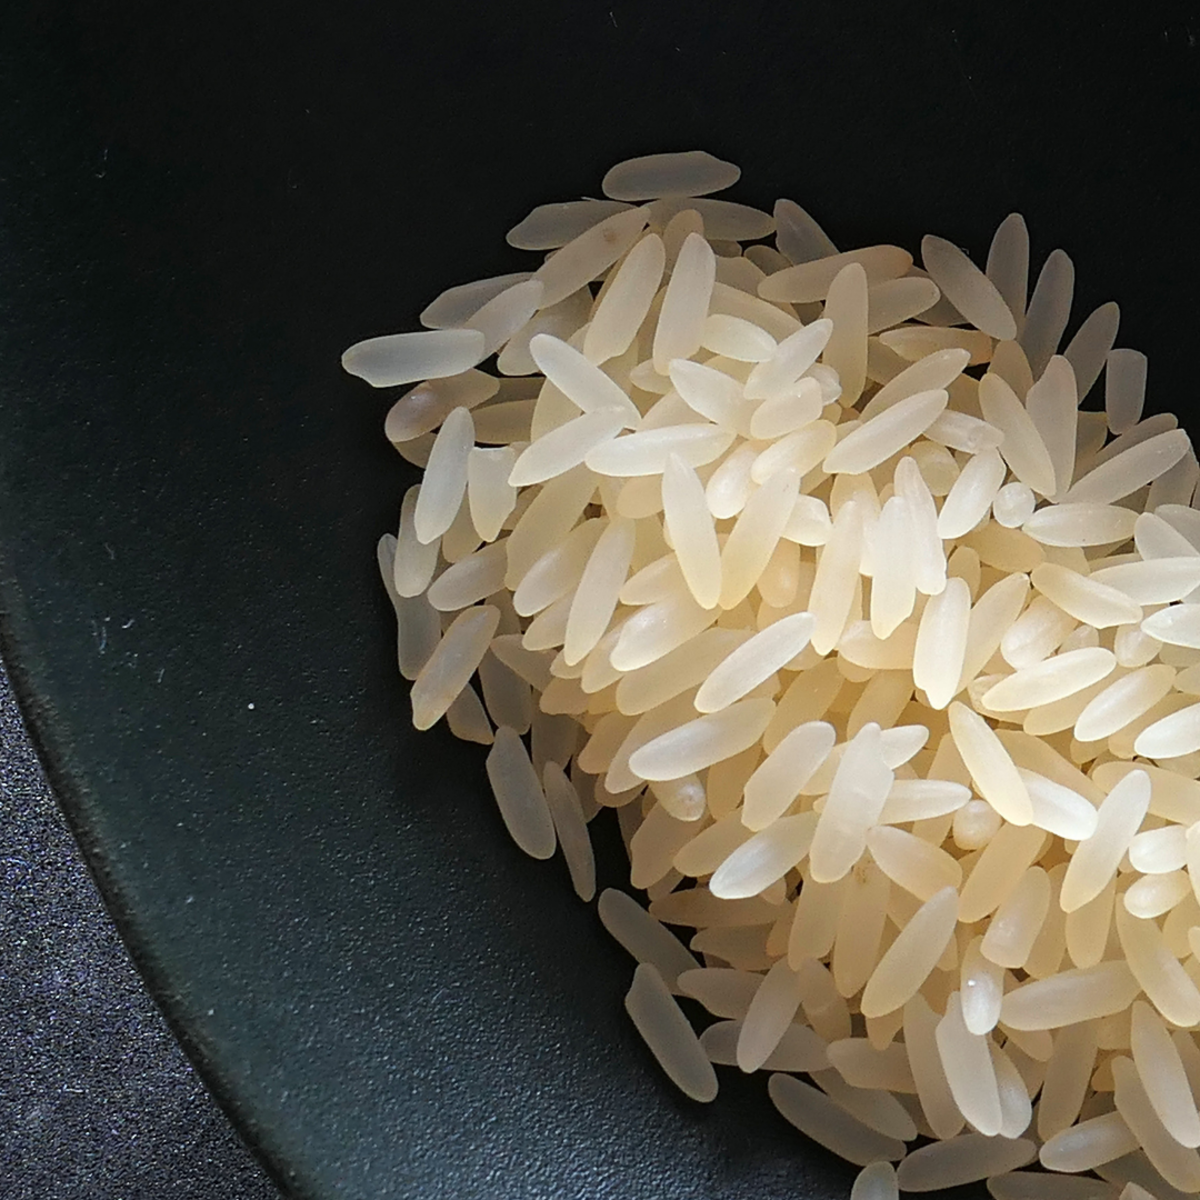 White rice and chicken can help to settle an upset stomach.